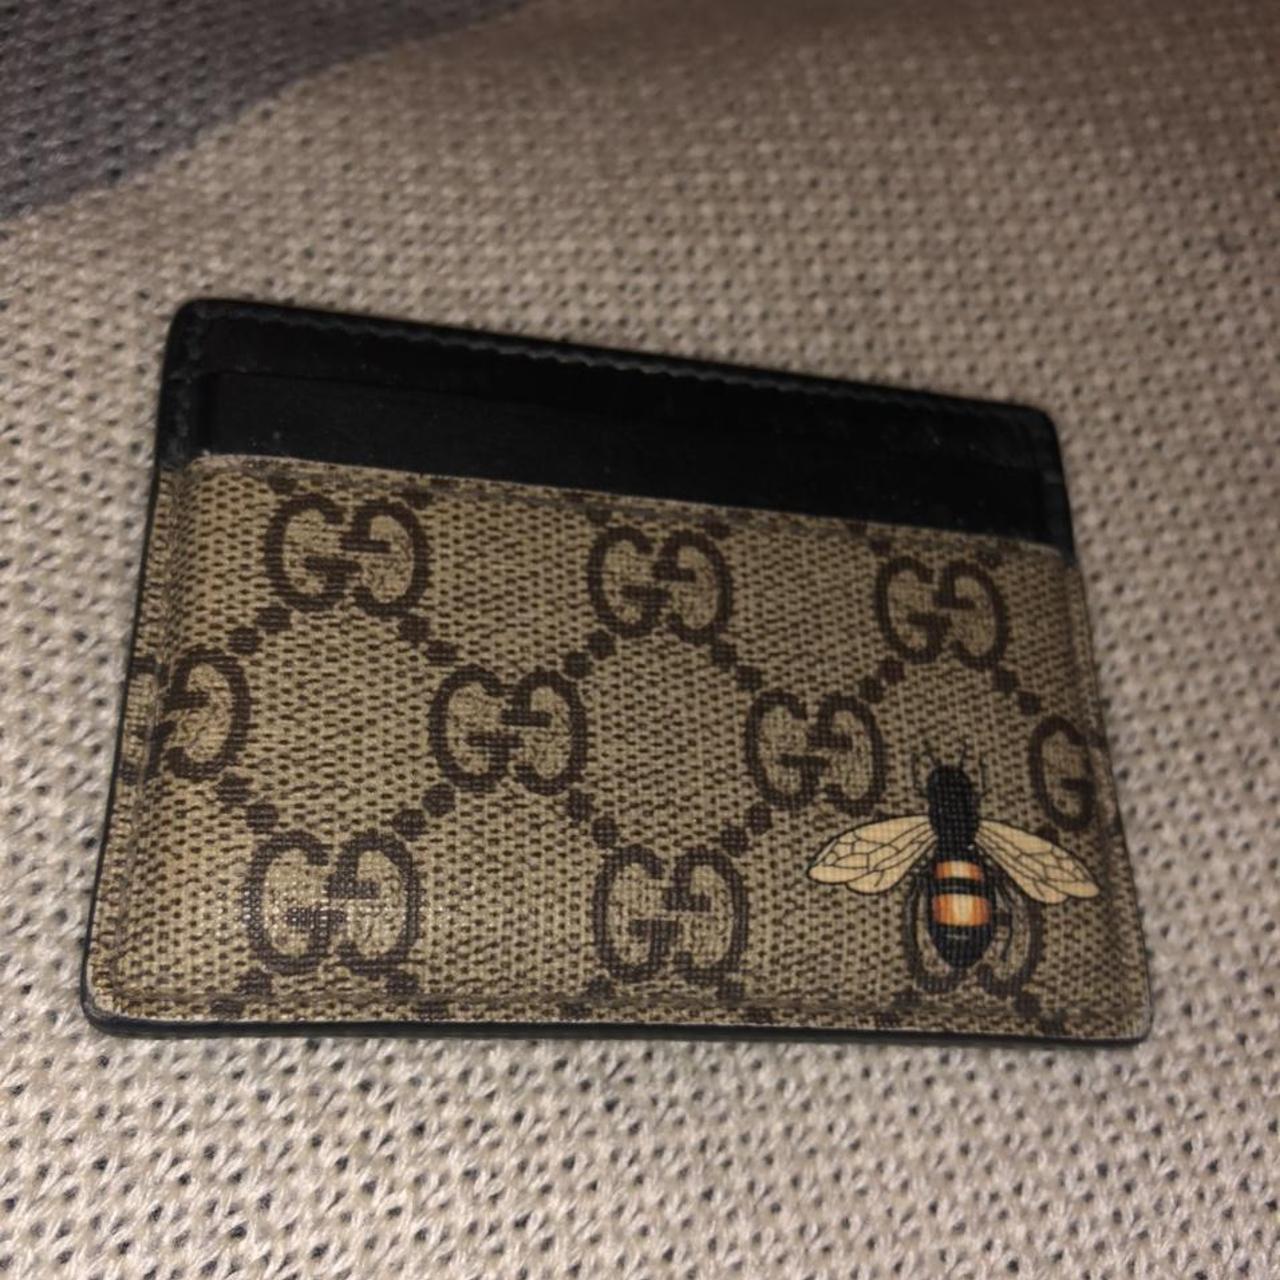 Brown Gucci GG Supreme Bee Wallet